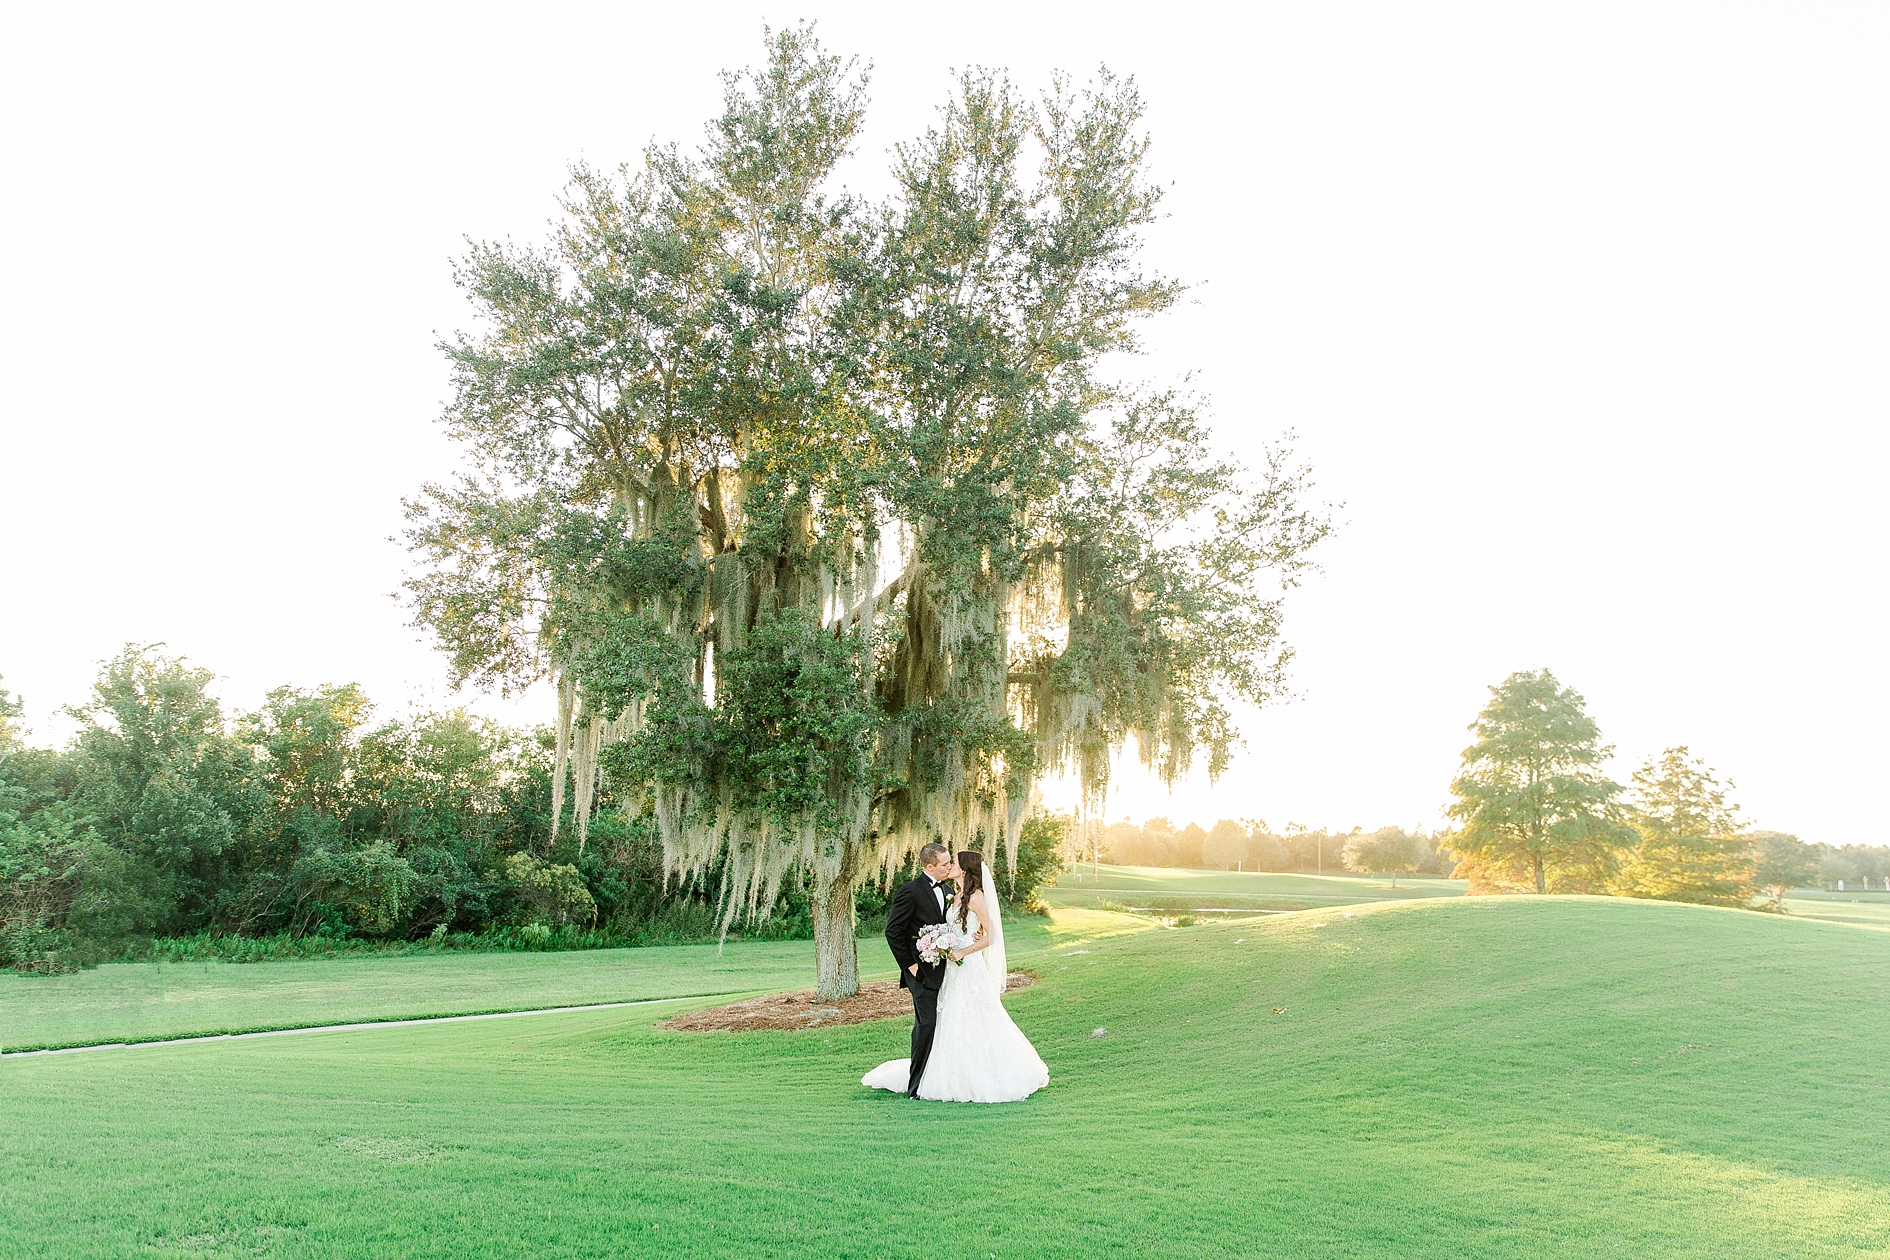 Lakewood Ranch Country Club Wedding | © Ailyn La Torre Photography 2015